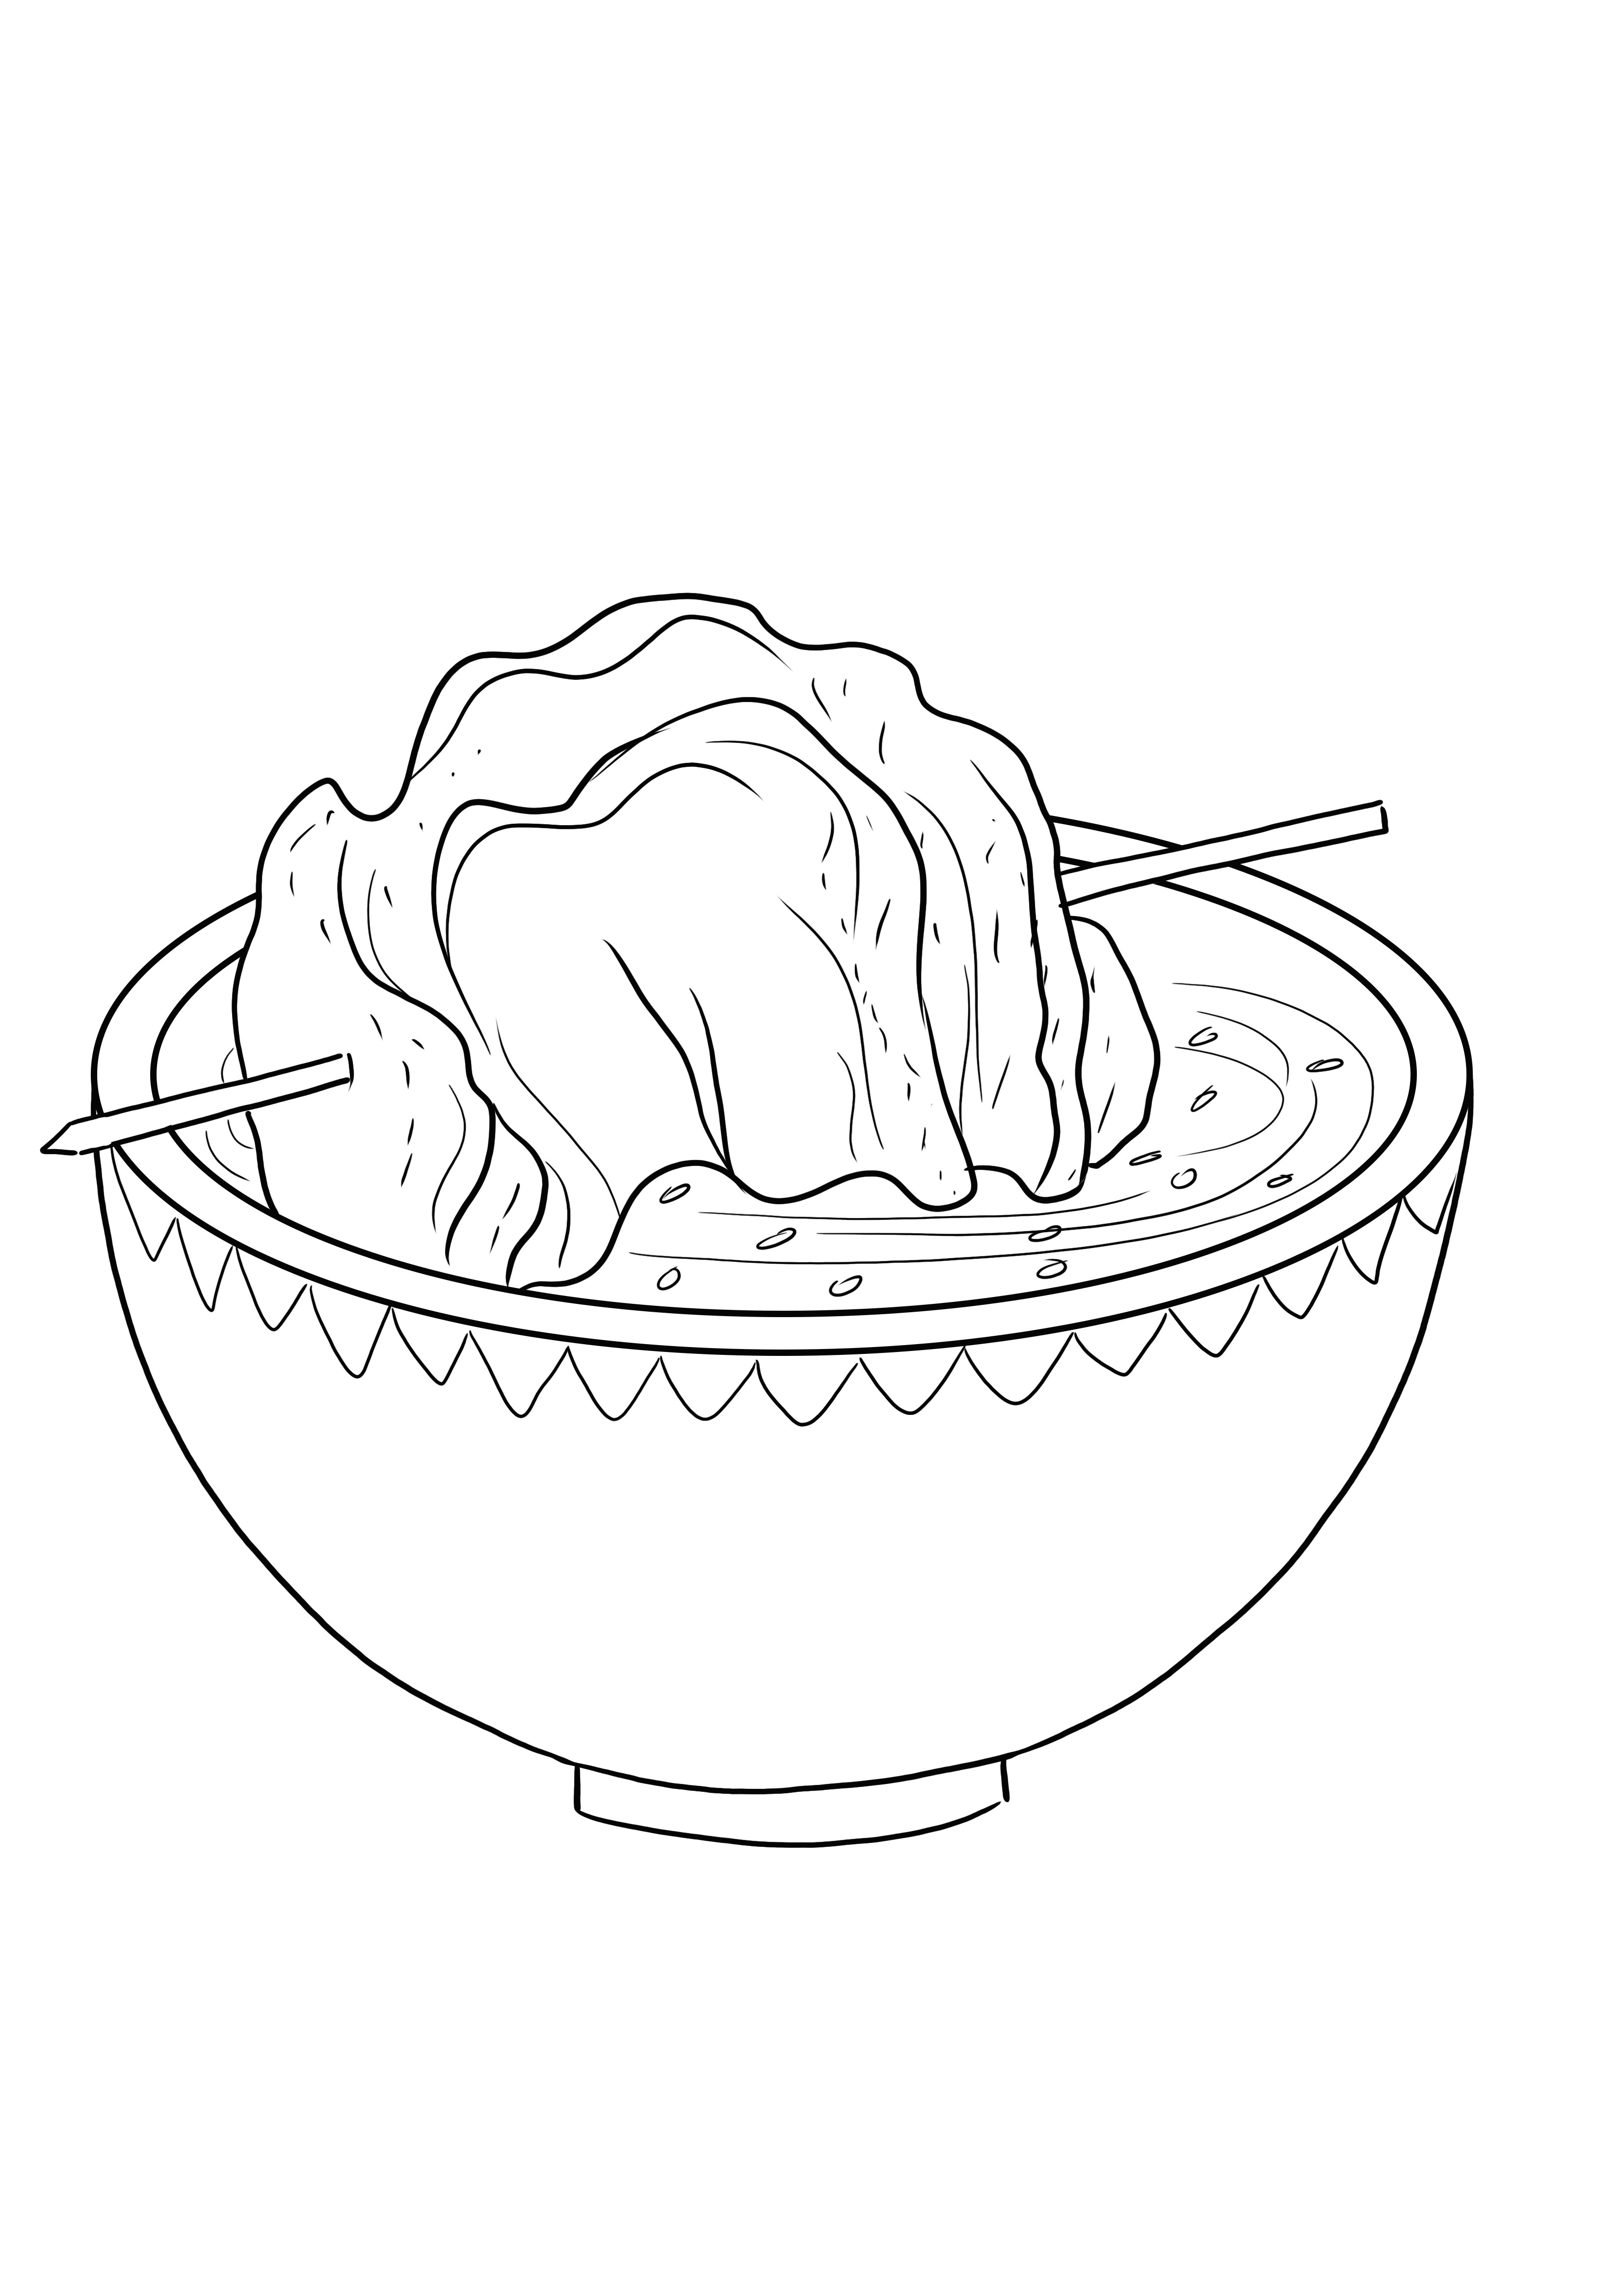 Creative coloring picture of a bowl of Asian food-free to download or print